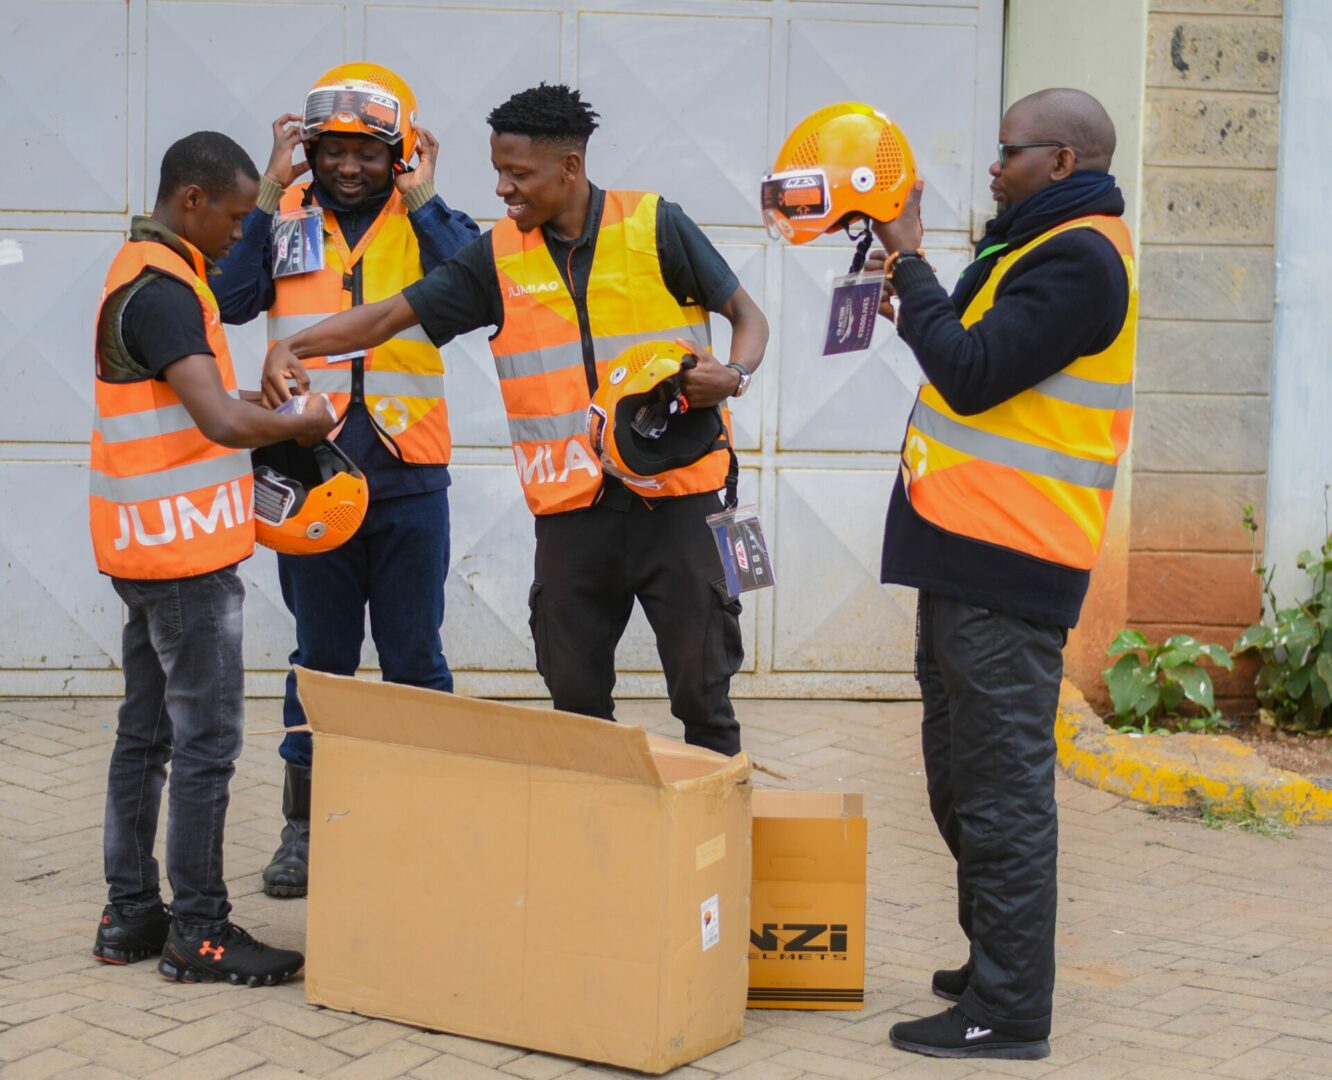 Jumia Gives High-quality Helmets to its Delivery Associates to support road safety